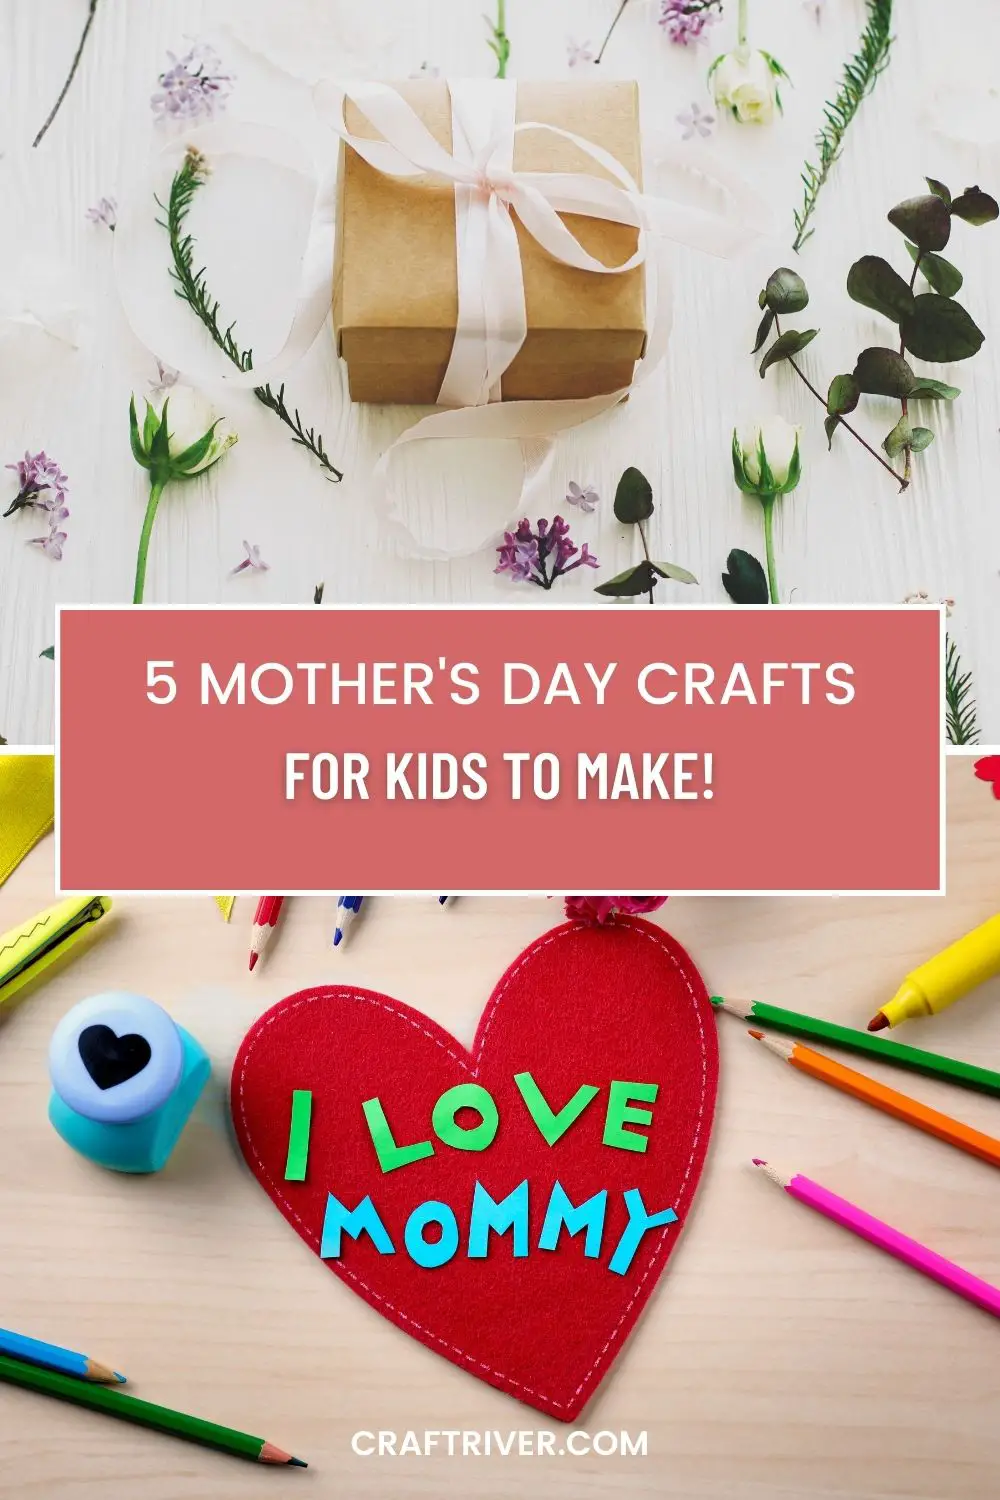 5 Mother's Day Crafts Ideas for Kids, Teens, and Preschoolers to Try!